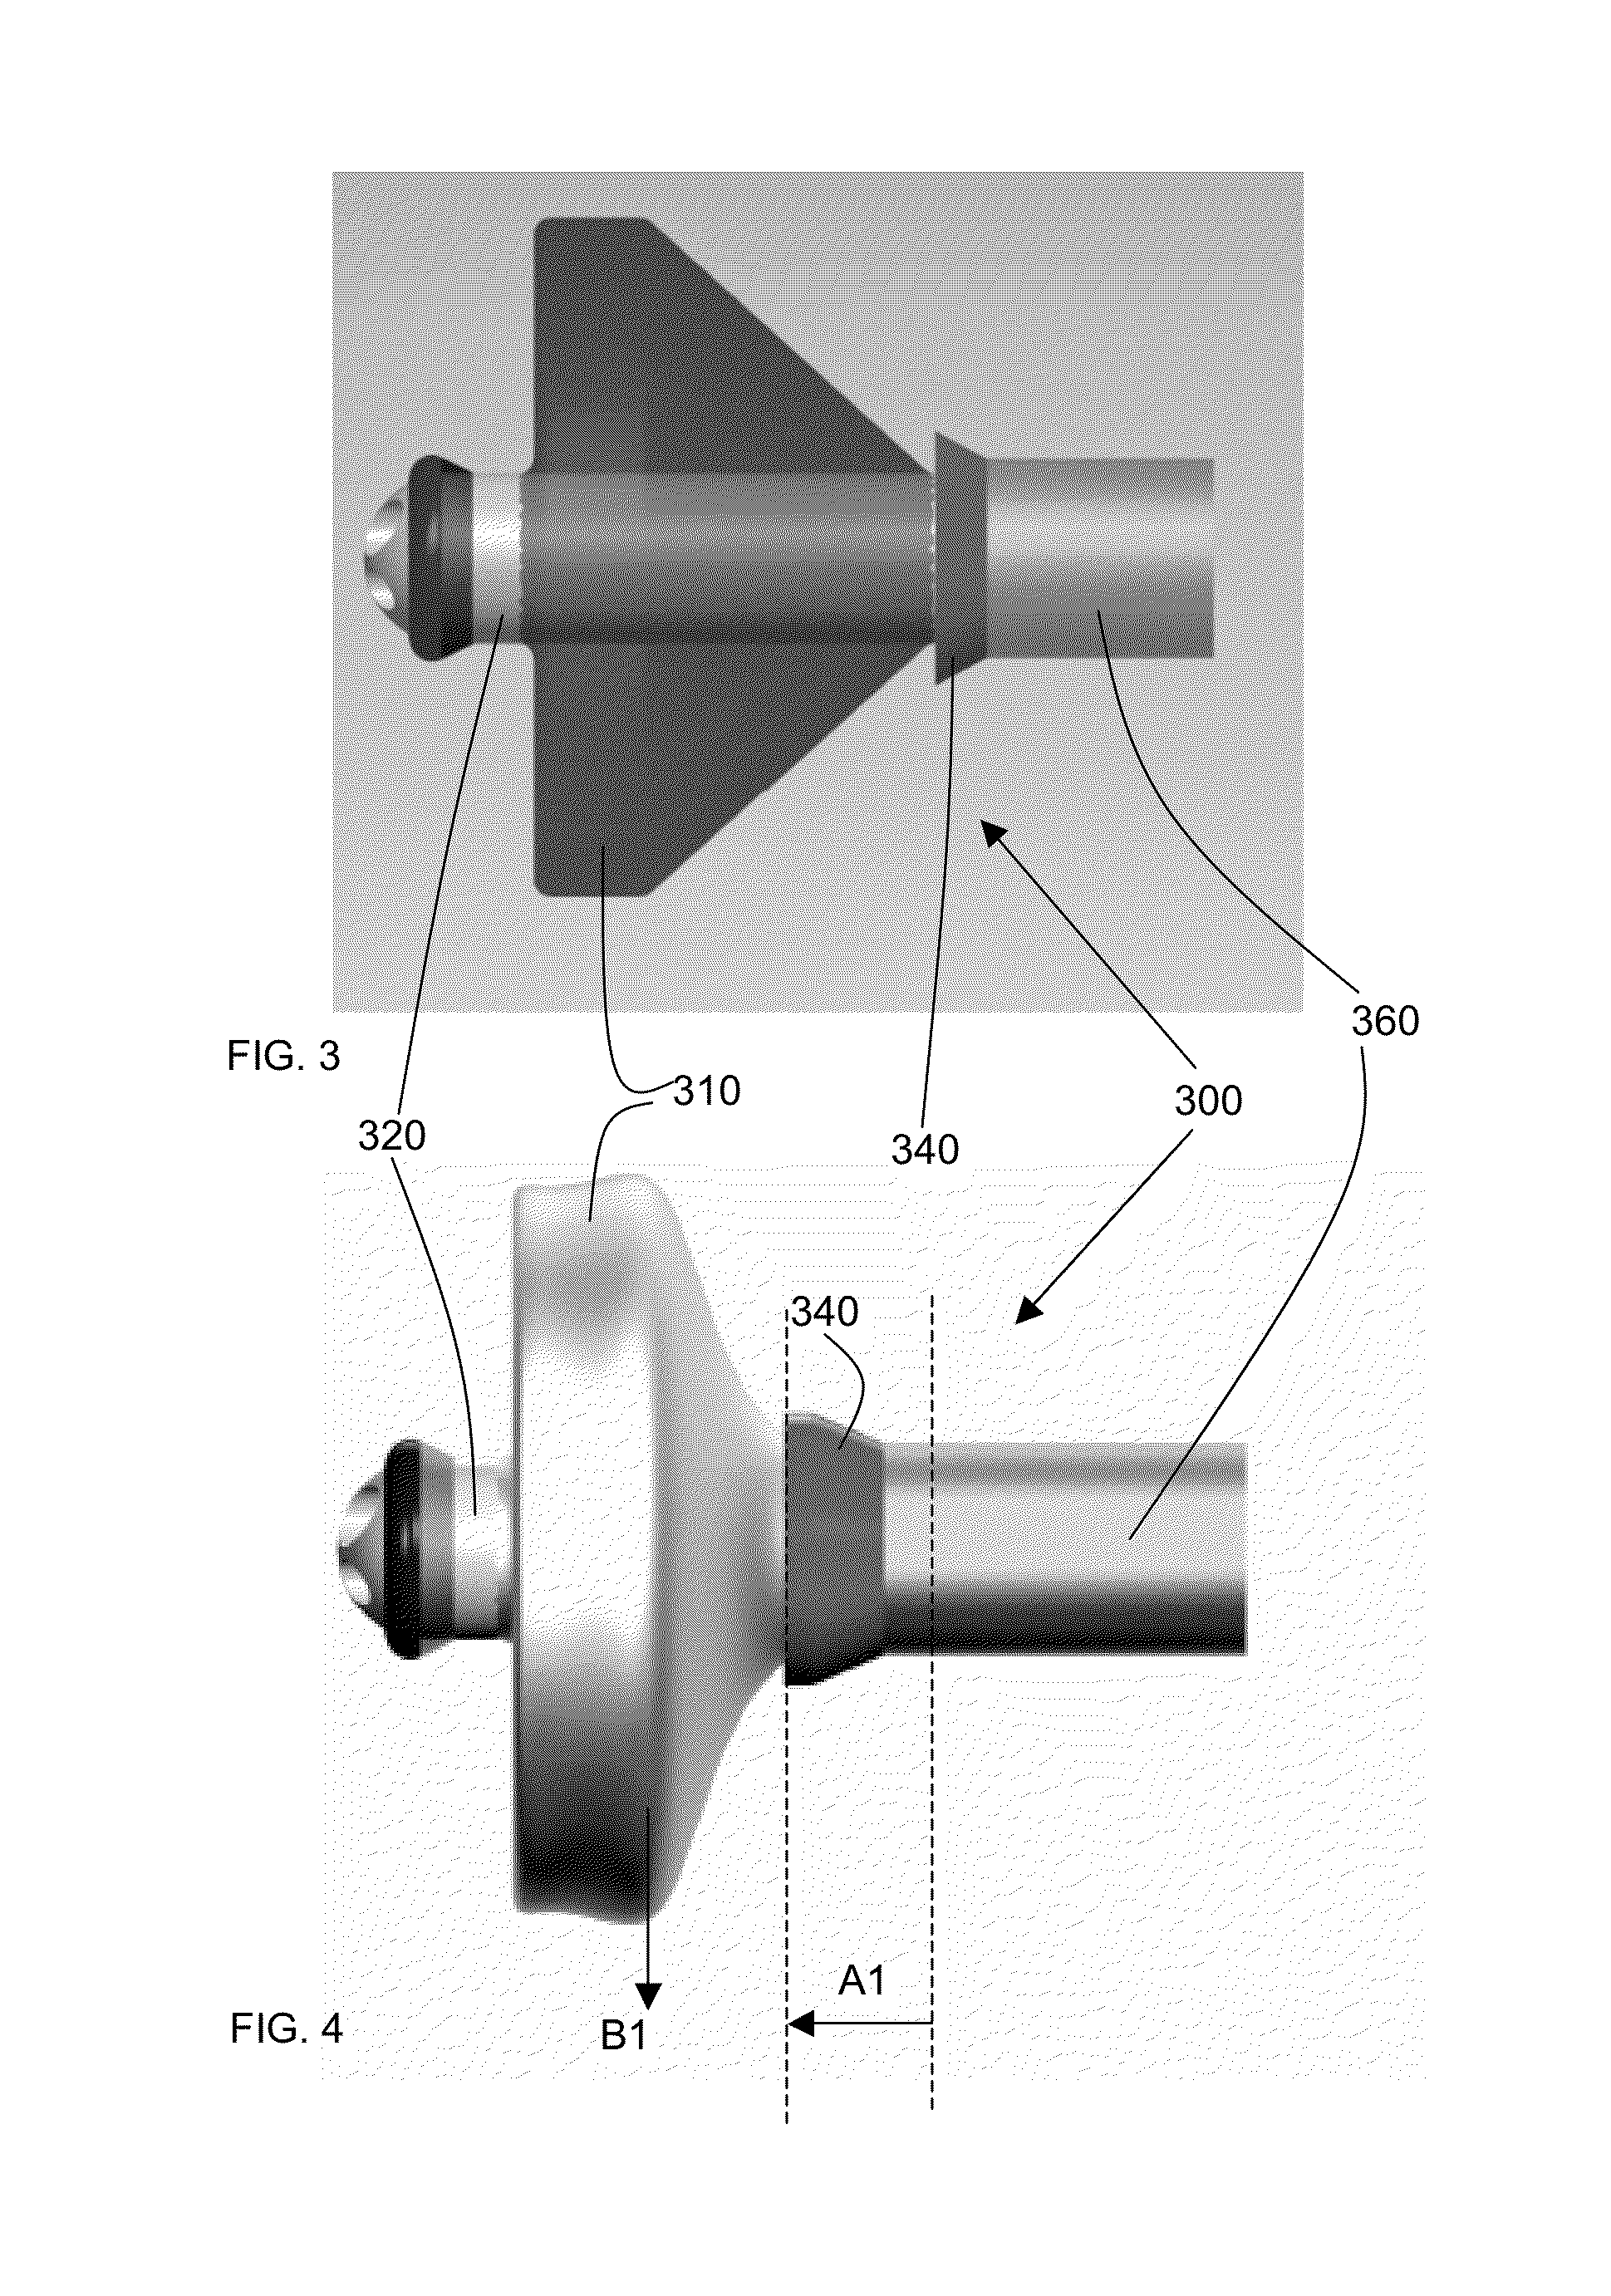 Expandable earpiece sealing devices and methods